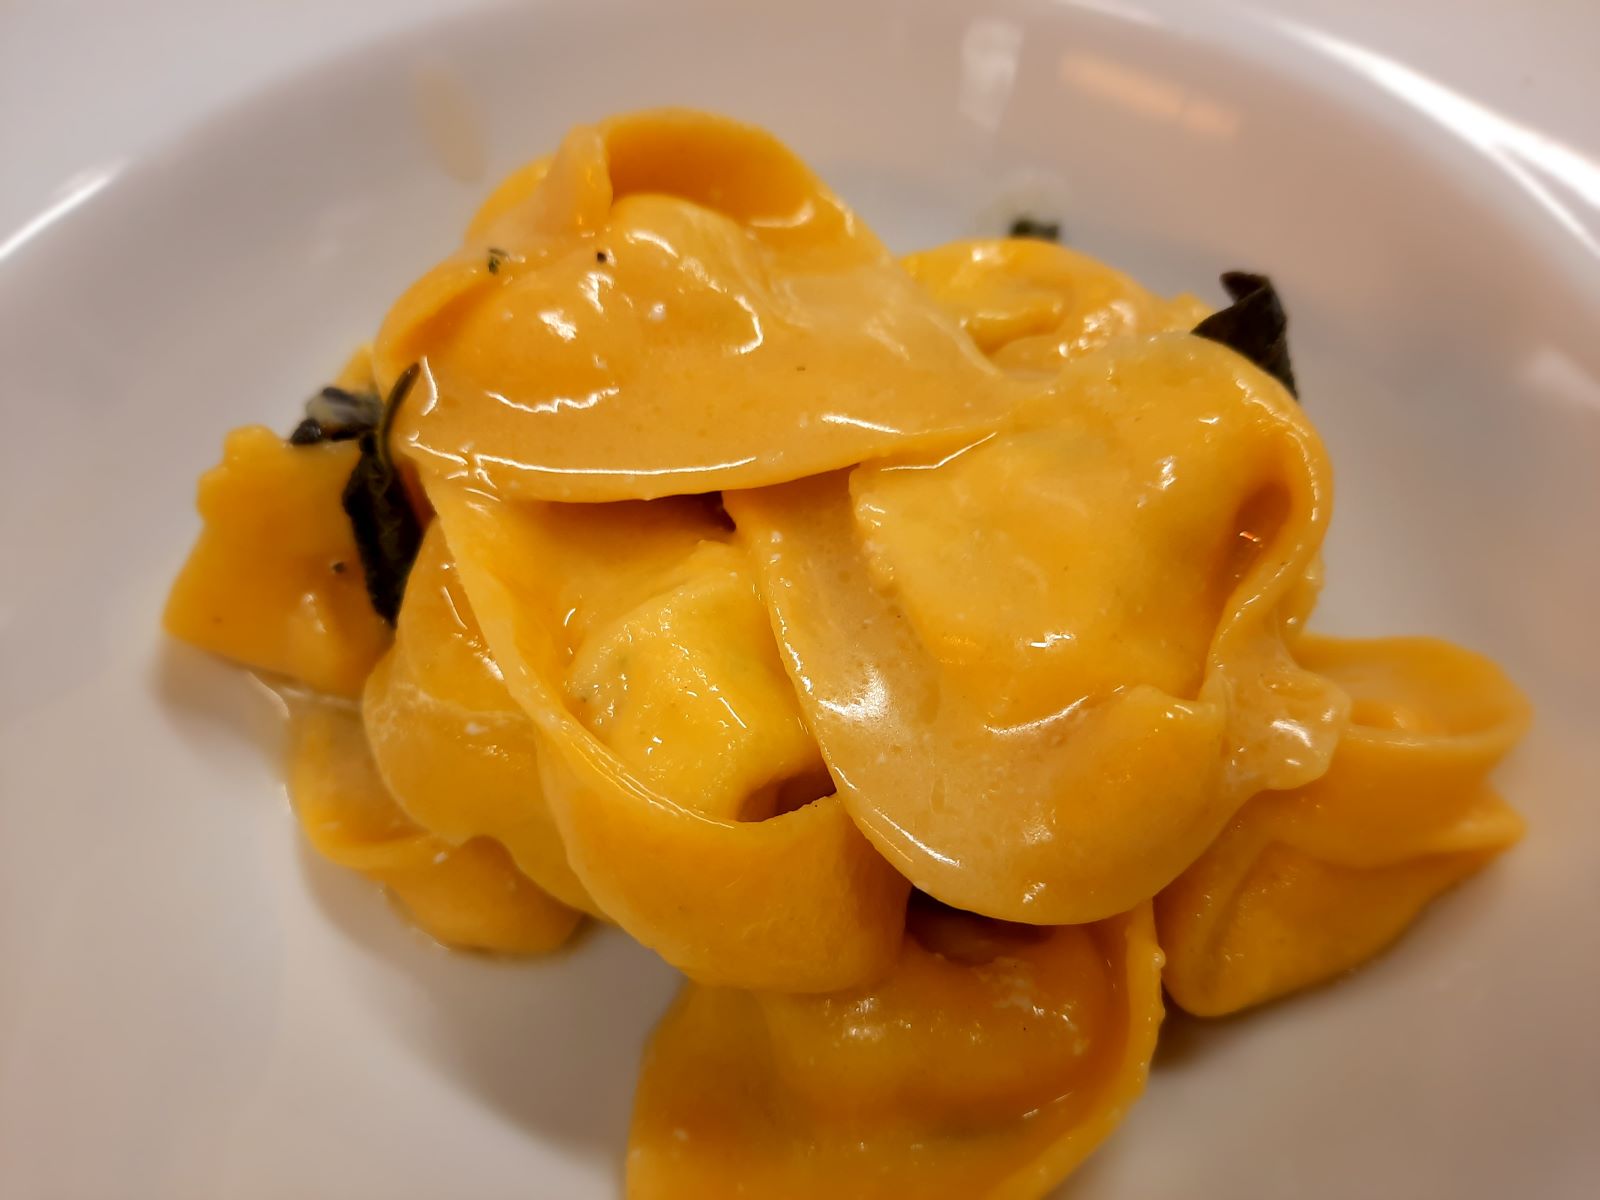 Tortelloni stuffed with ricotta and spinach, with butter and sage